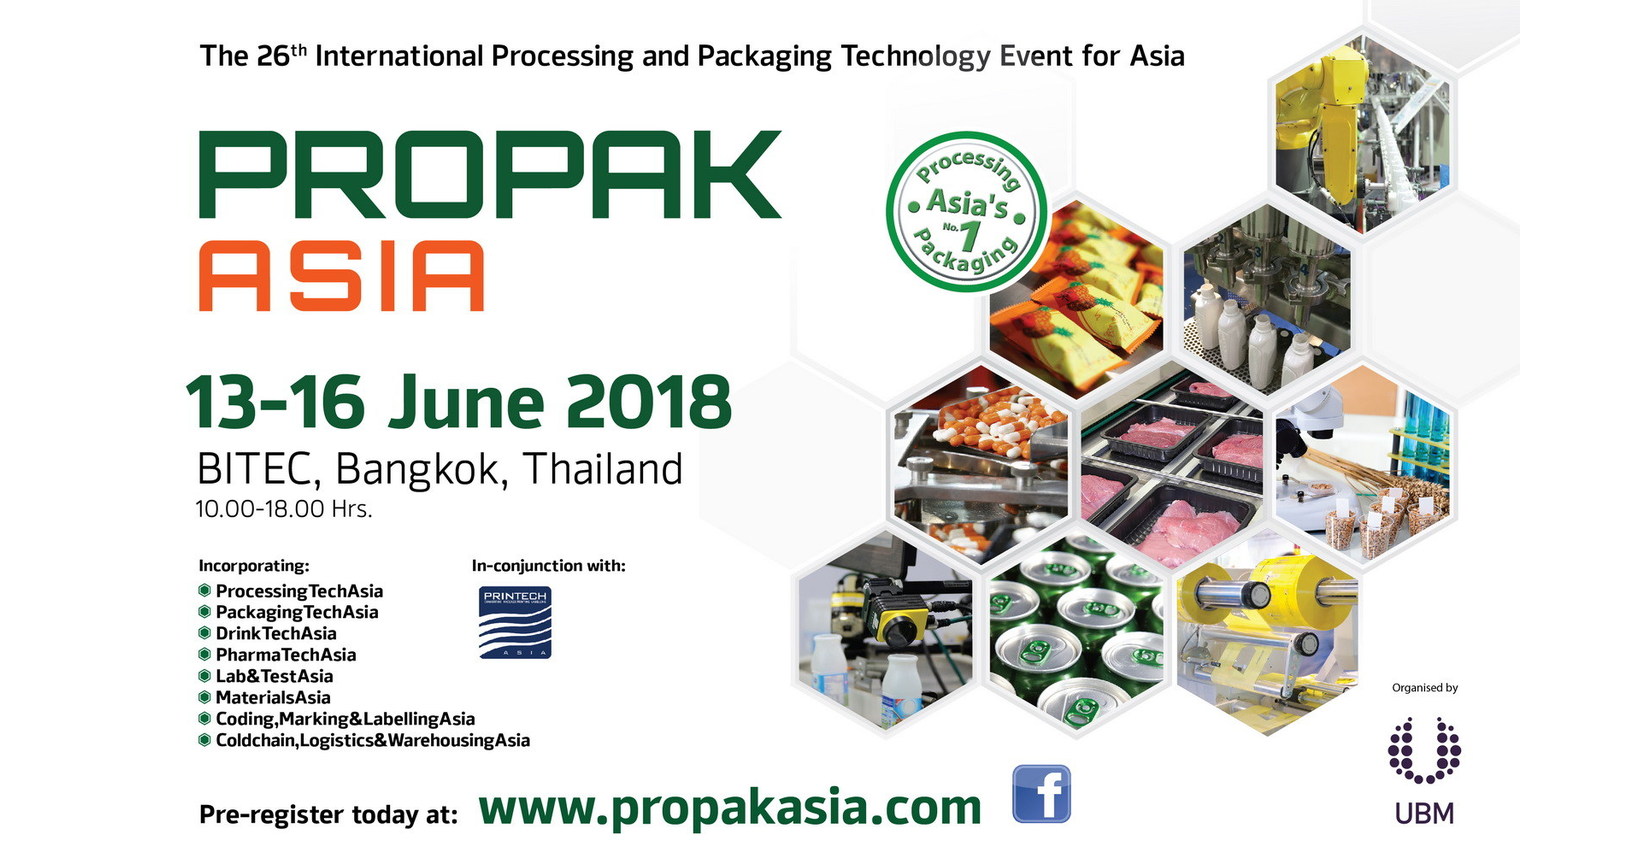 ProPak Asia 2018 Returns with the Latest Innovations & Technologies for